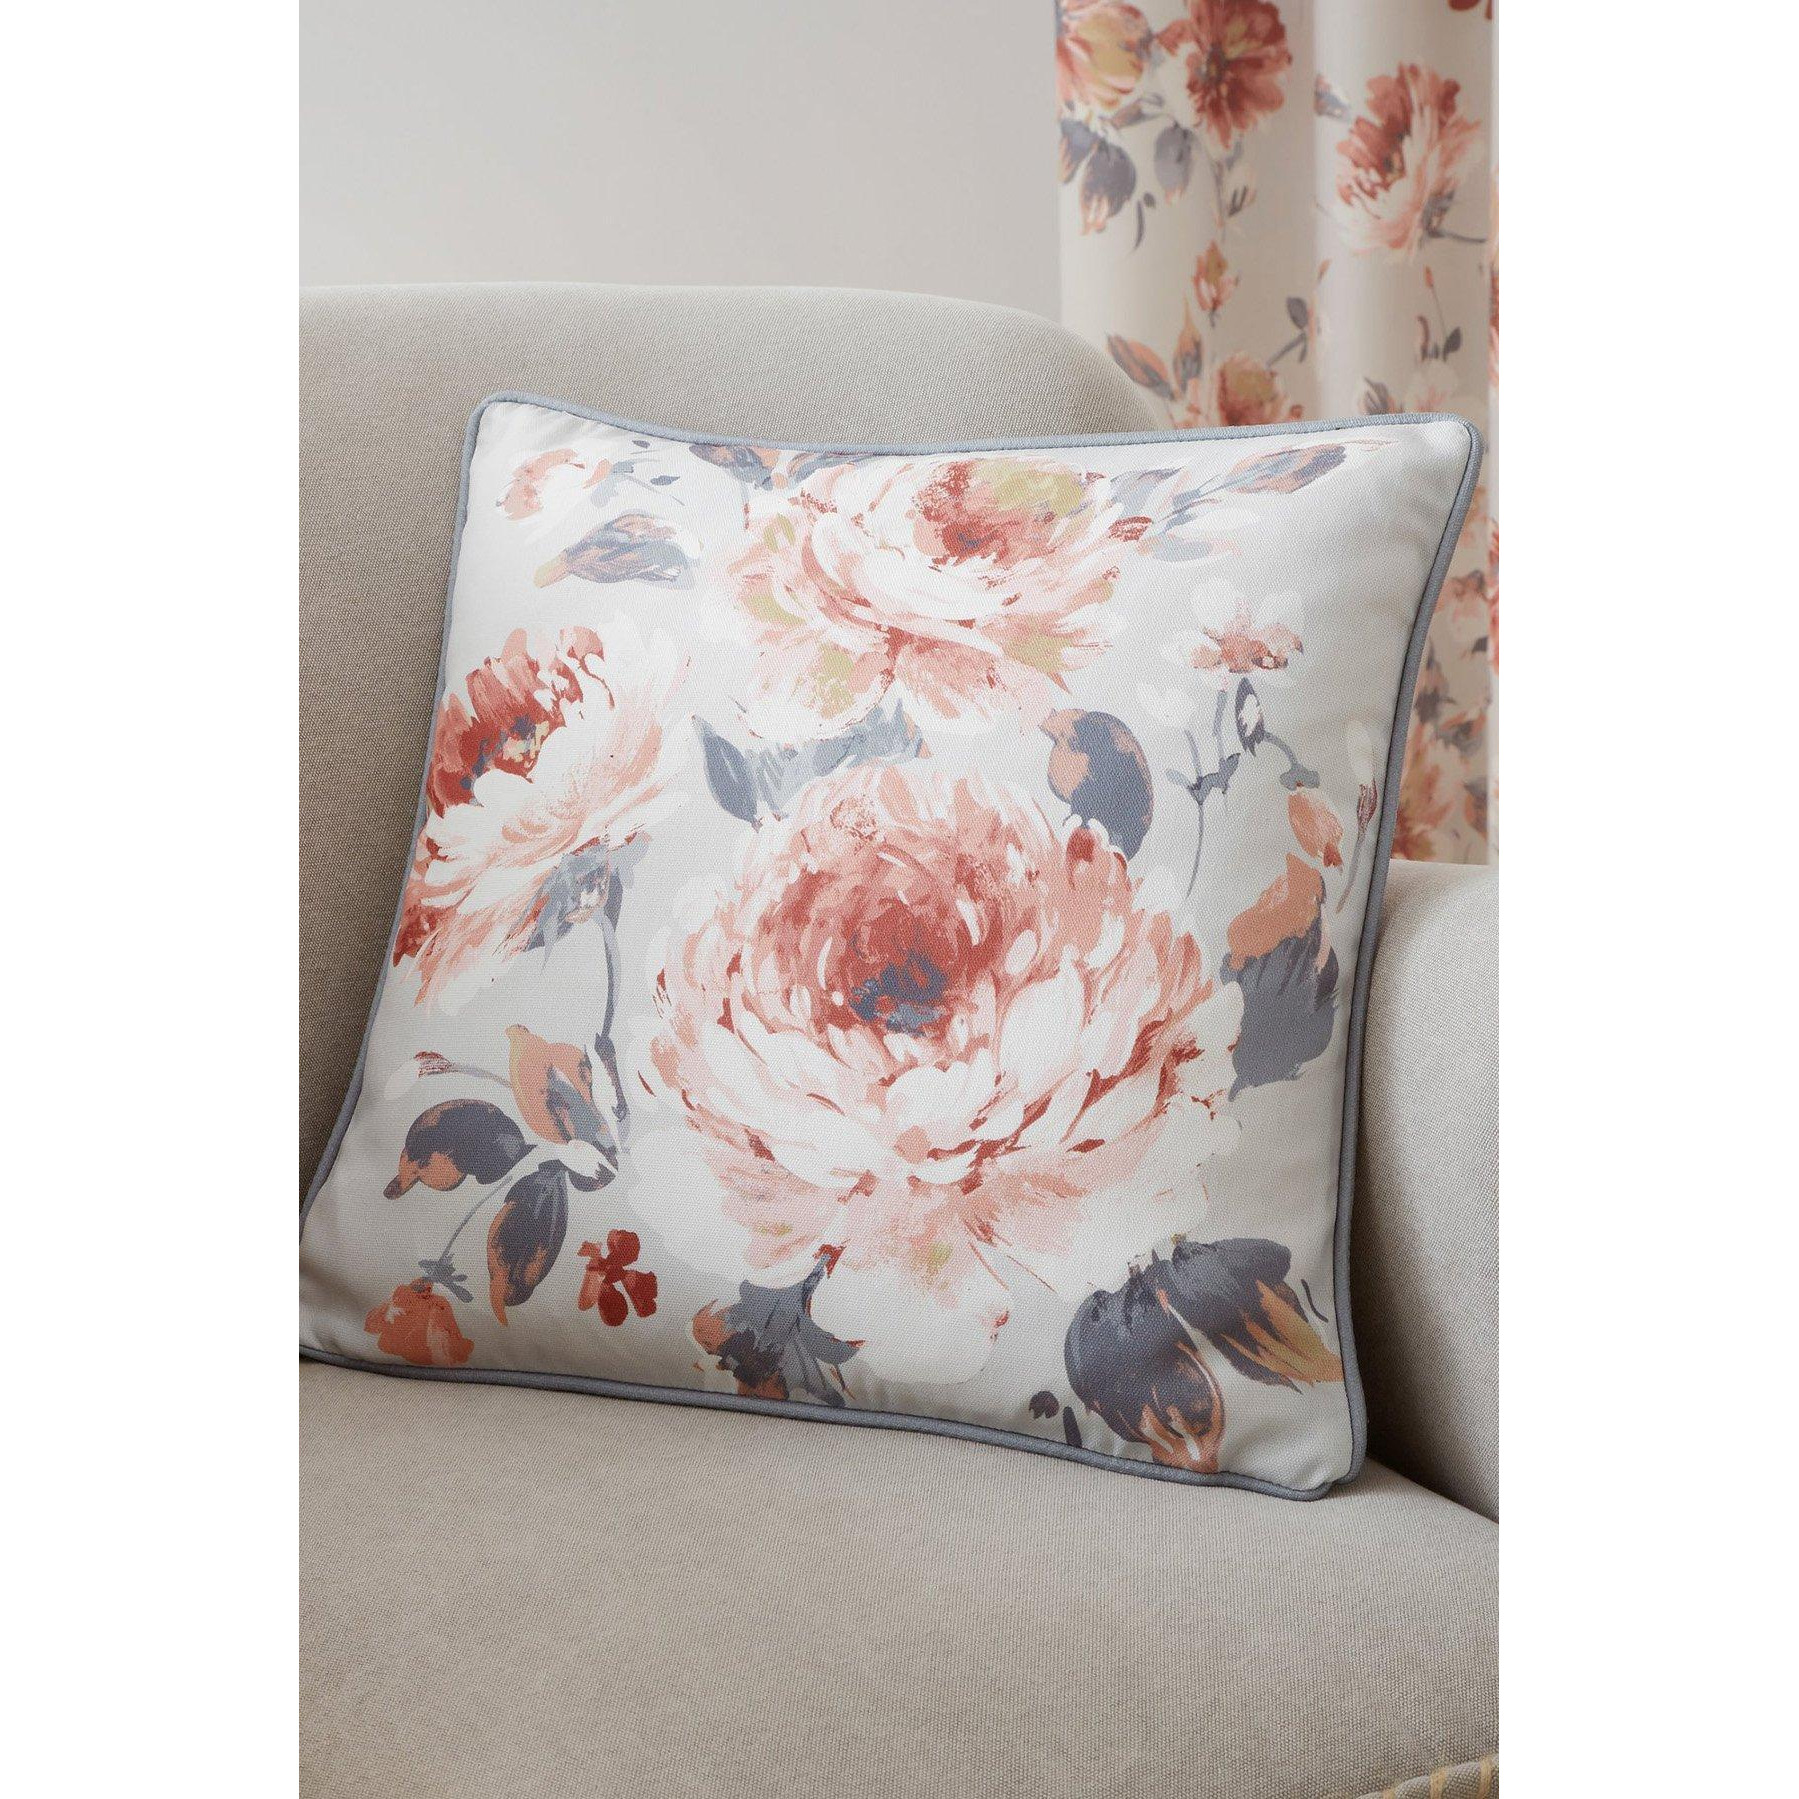 'Charity' Filled 100% Cotton Cushion With Rich Flower Print - image 1